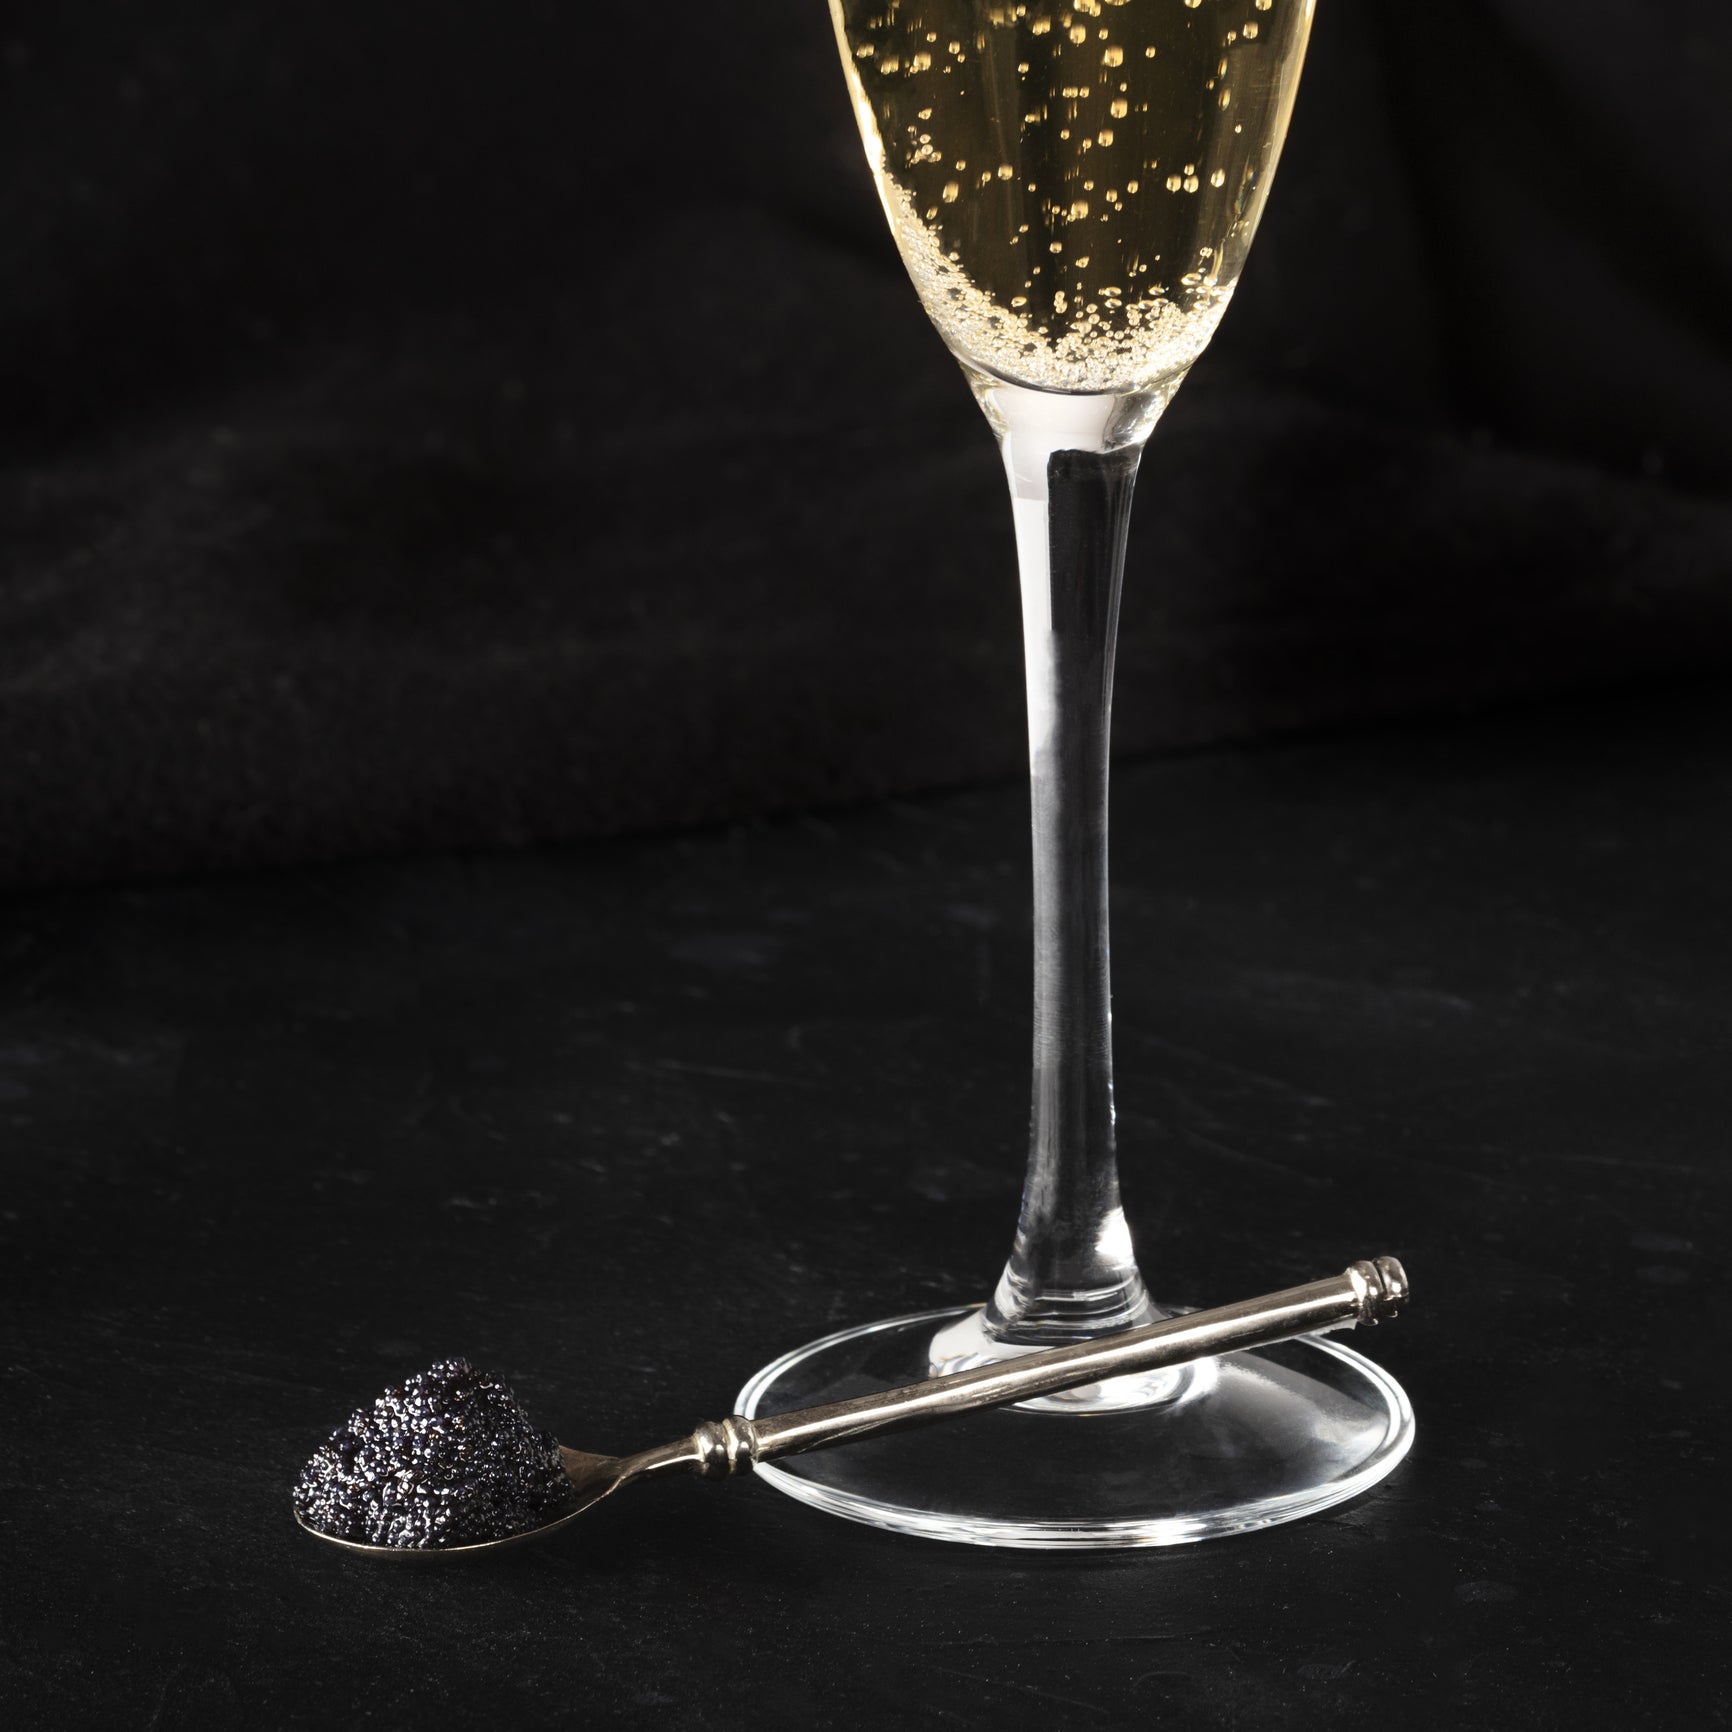 Black Caviar and Champagne: The Perfect Pairing